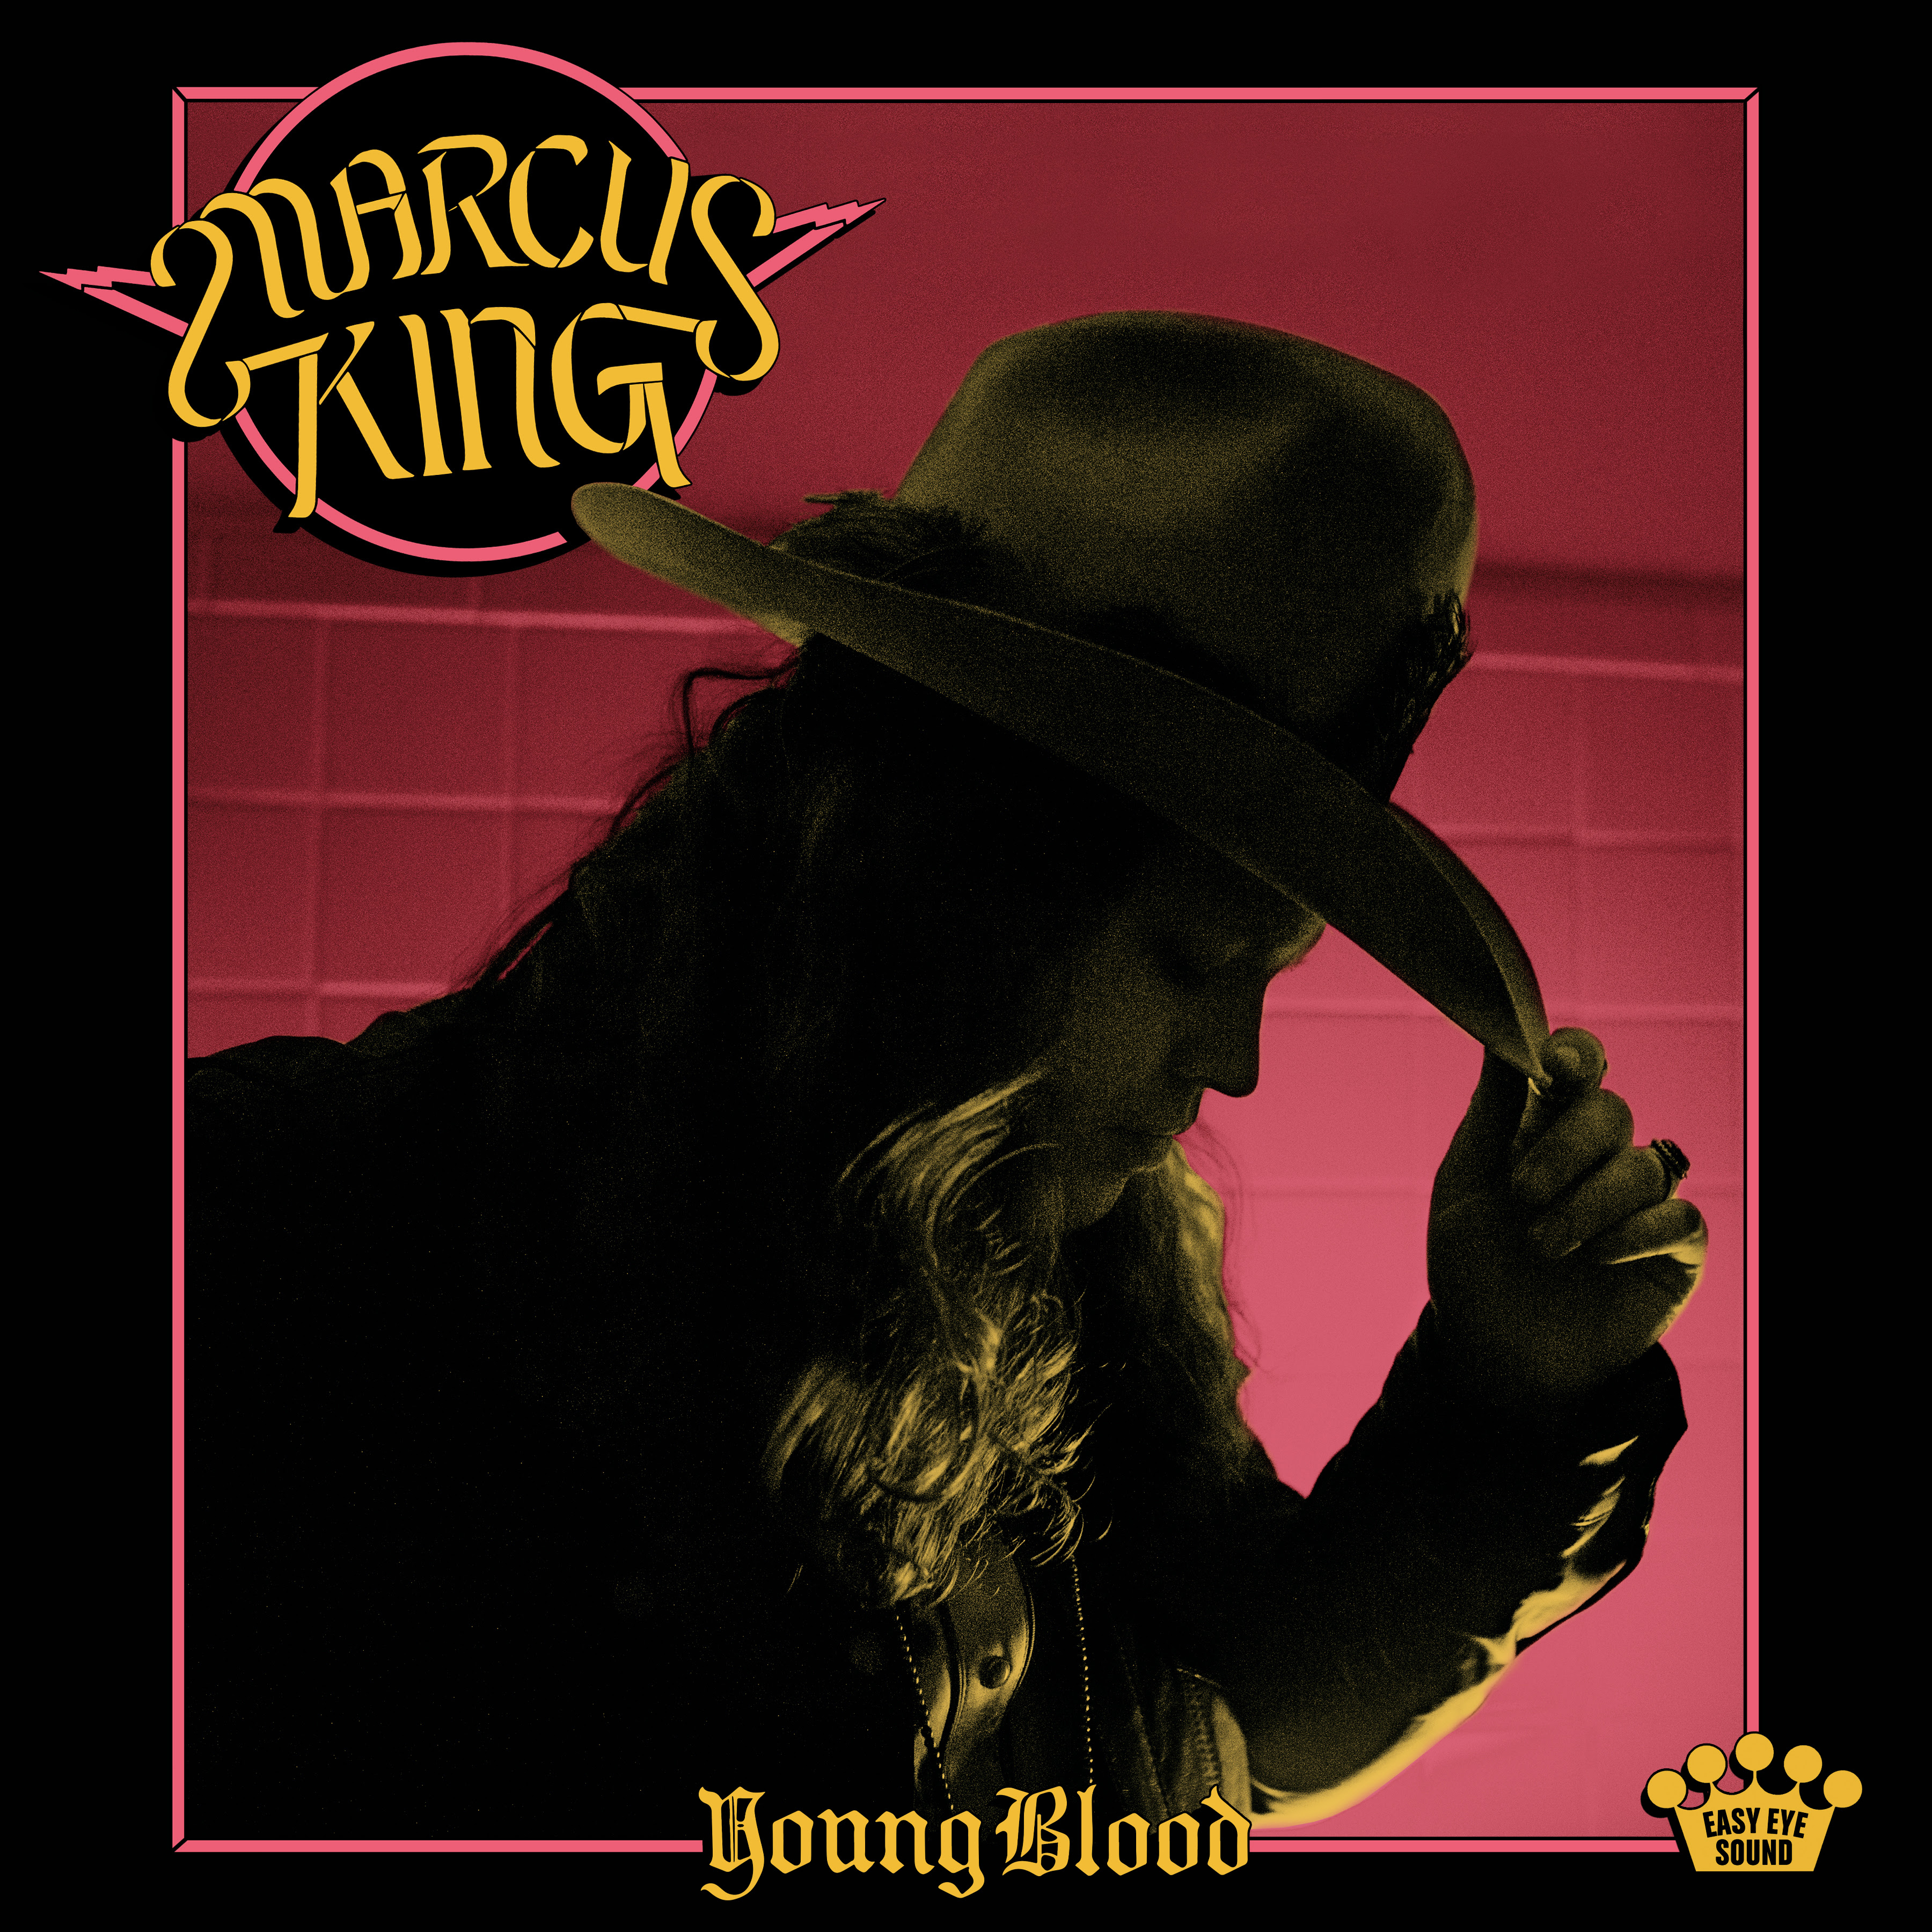 Marcus King releases Dan Auerbach produced album, Young Blood